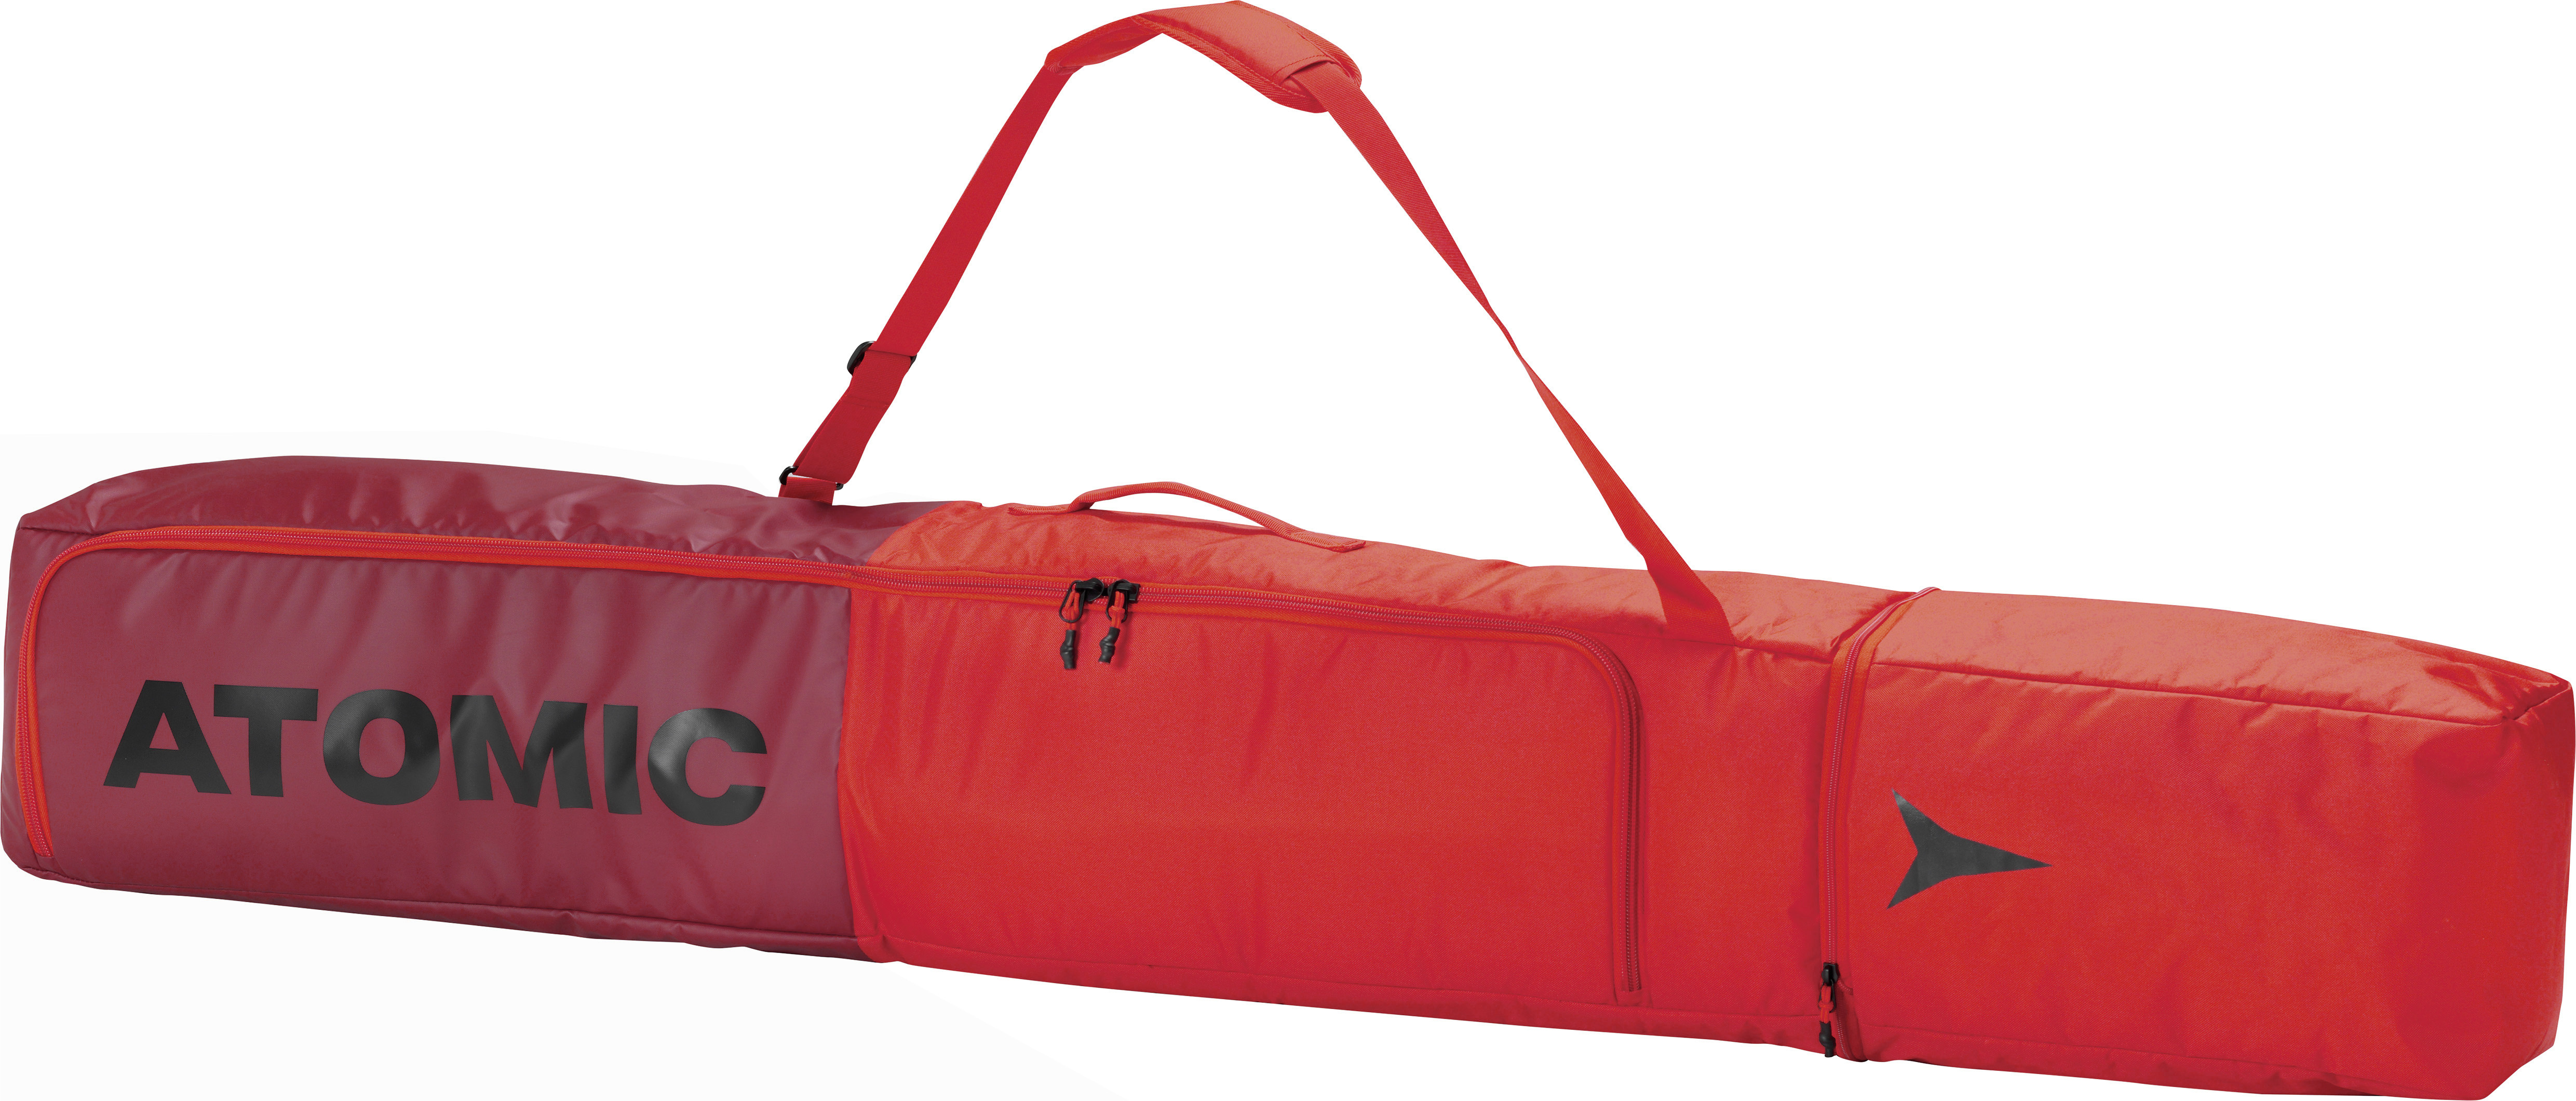 DOUBLE SKI BAG Red/Rio Red